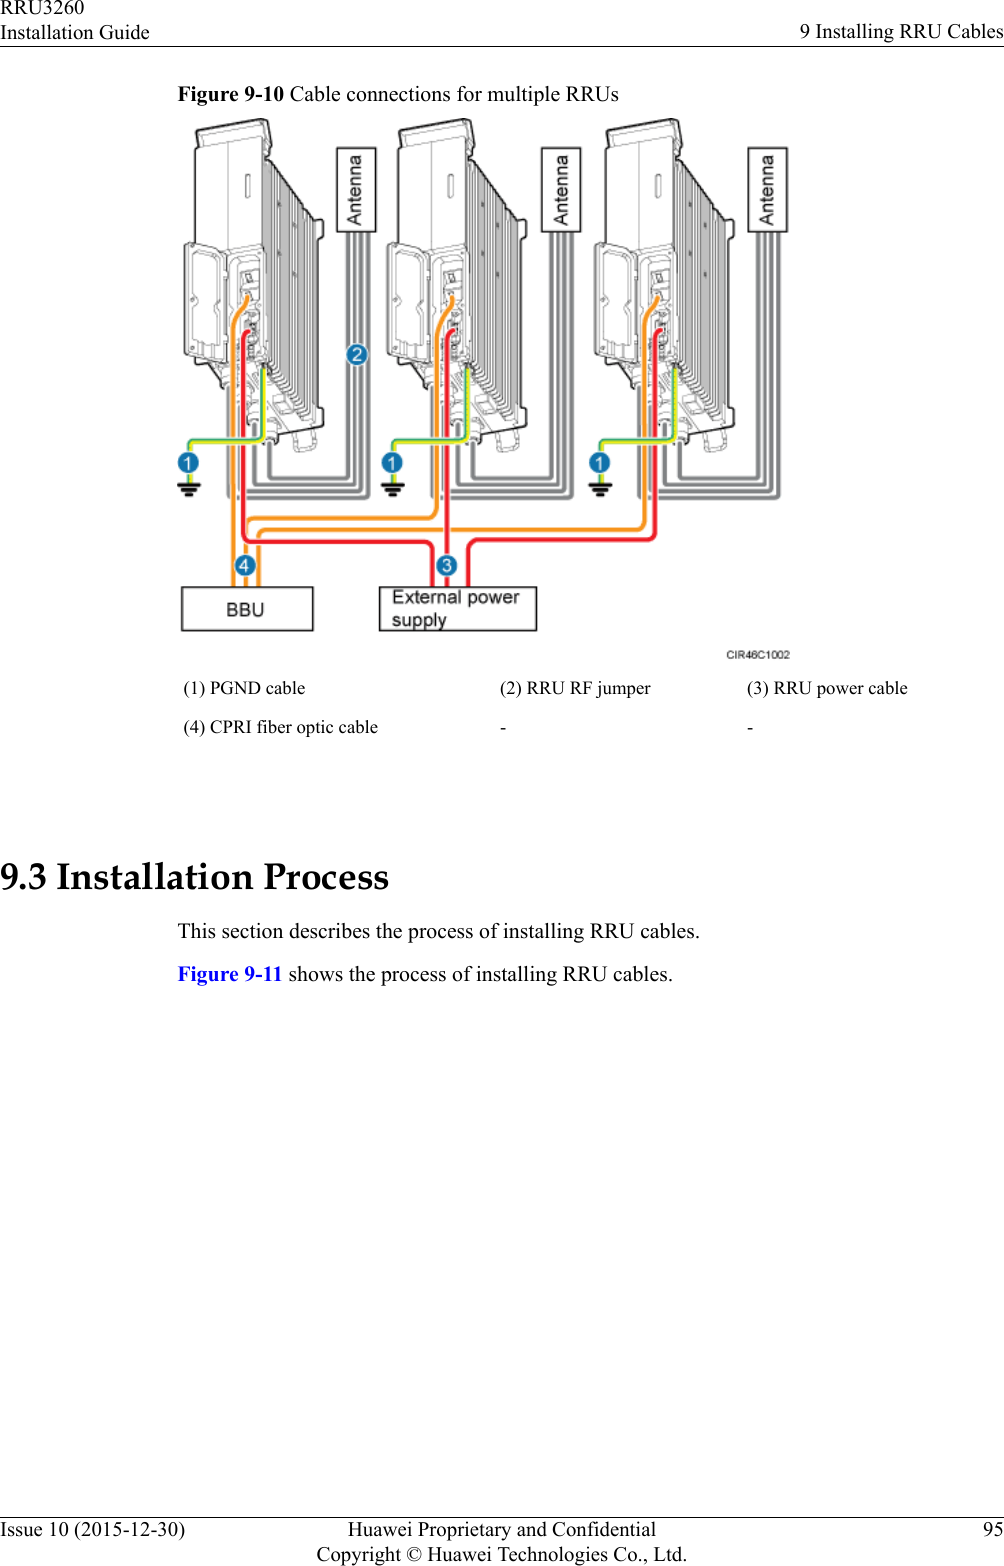 Figure 9-10 Cable connections for multiple RRUs(1) PGND cable (2) RRU RF jumper (3) RRU power cable(4) CPRI fiber optic cable - - 9.3 Installation ProcessThis section describes the process of installing RRU cables.Figure 9-11 shows the process of installing RRU cables.RRU3260Installation Guide 9 Installing RRU CablesIssue 10 (2015-12-30) Huawei Proprietary and ConfidentialCopyright © Huawei Technologies Co., Ltd.95